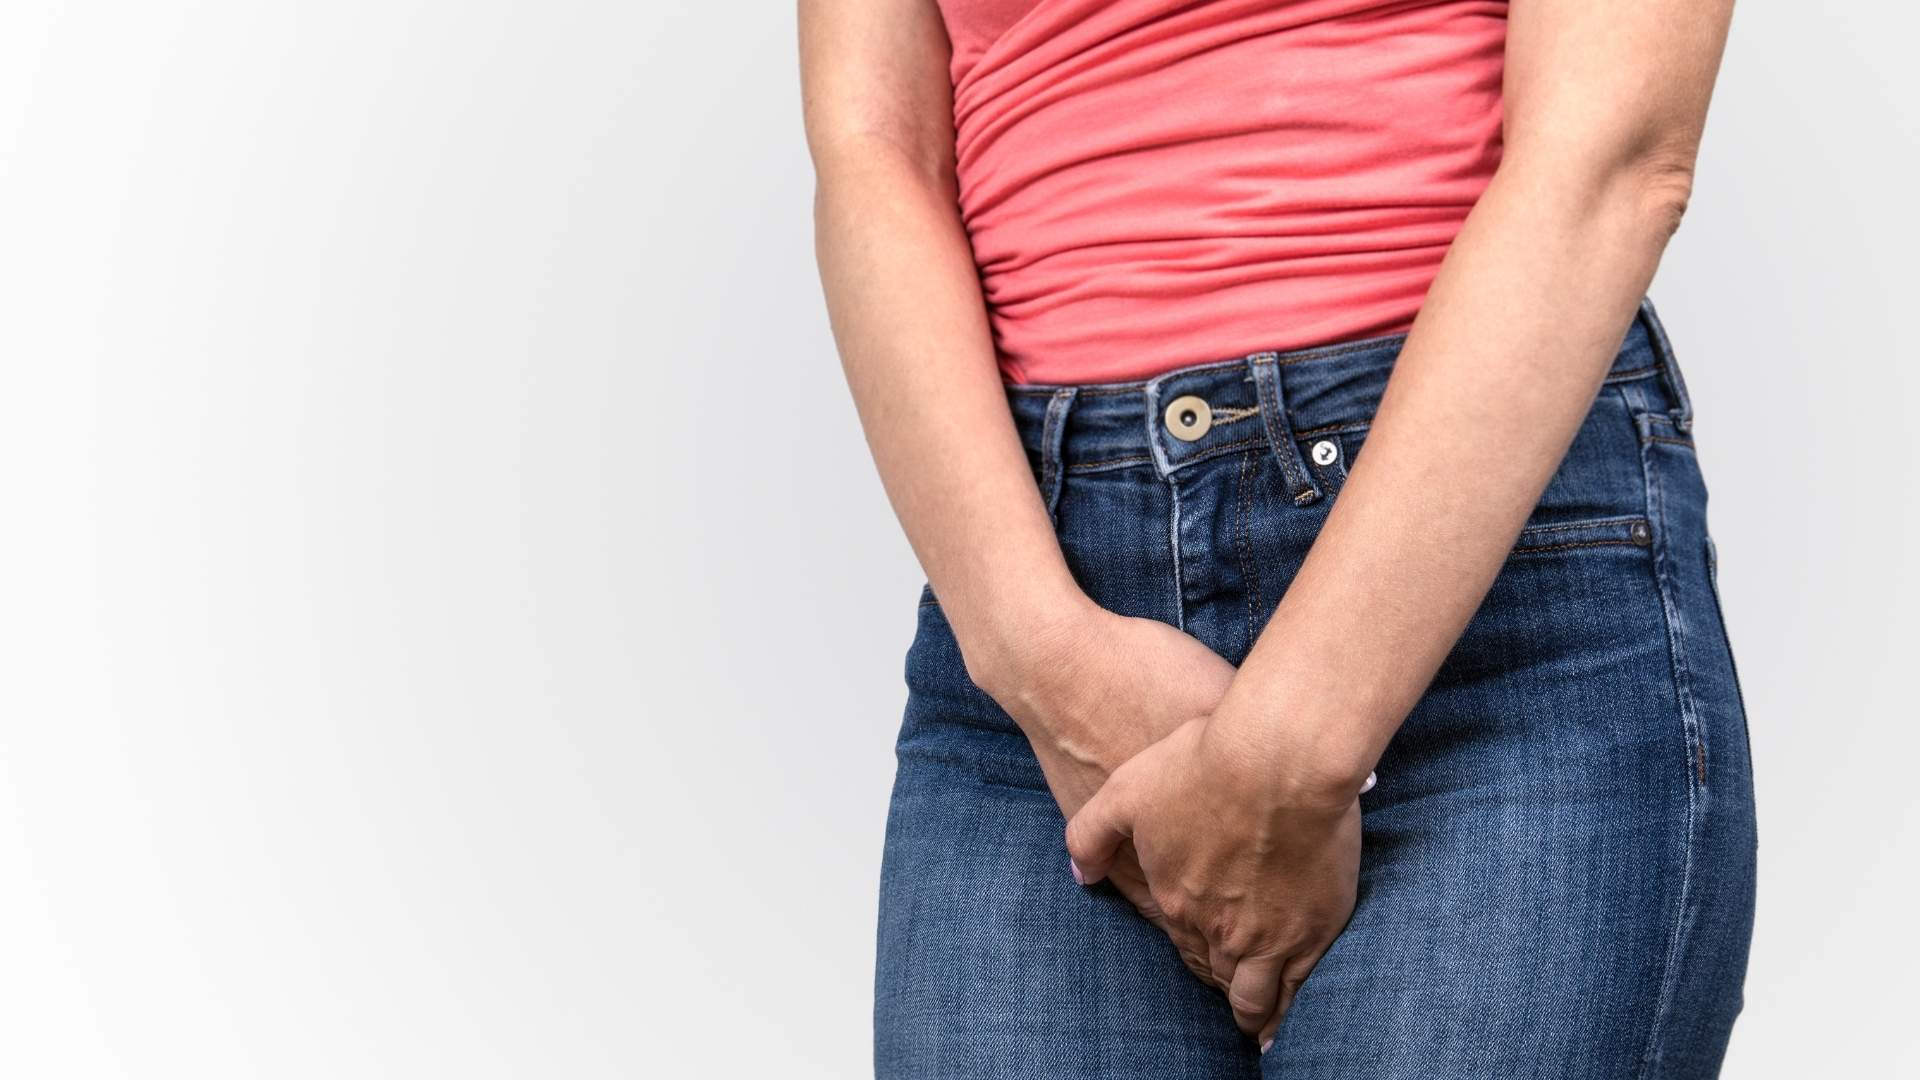 Does Holding Your Pee Cause Incontinence? - ONDR